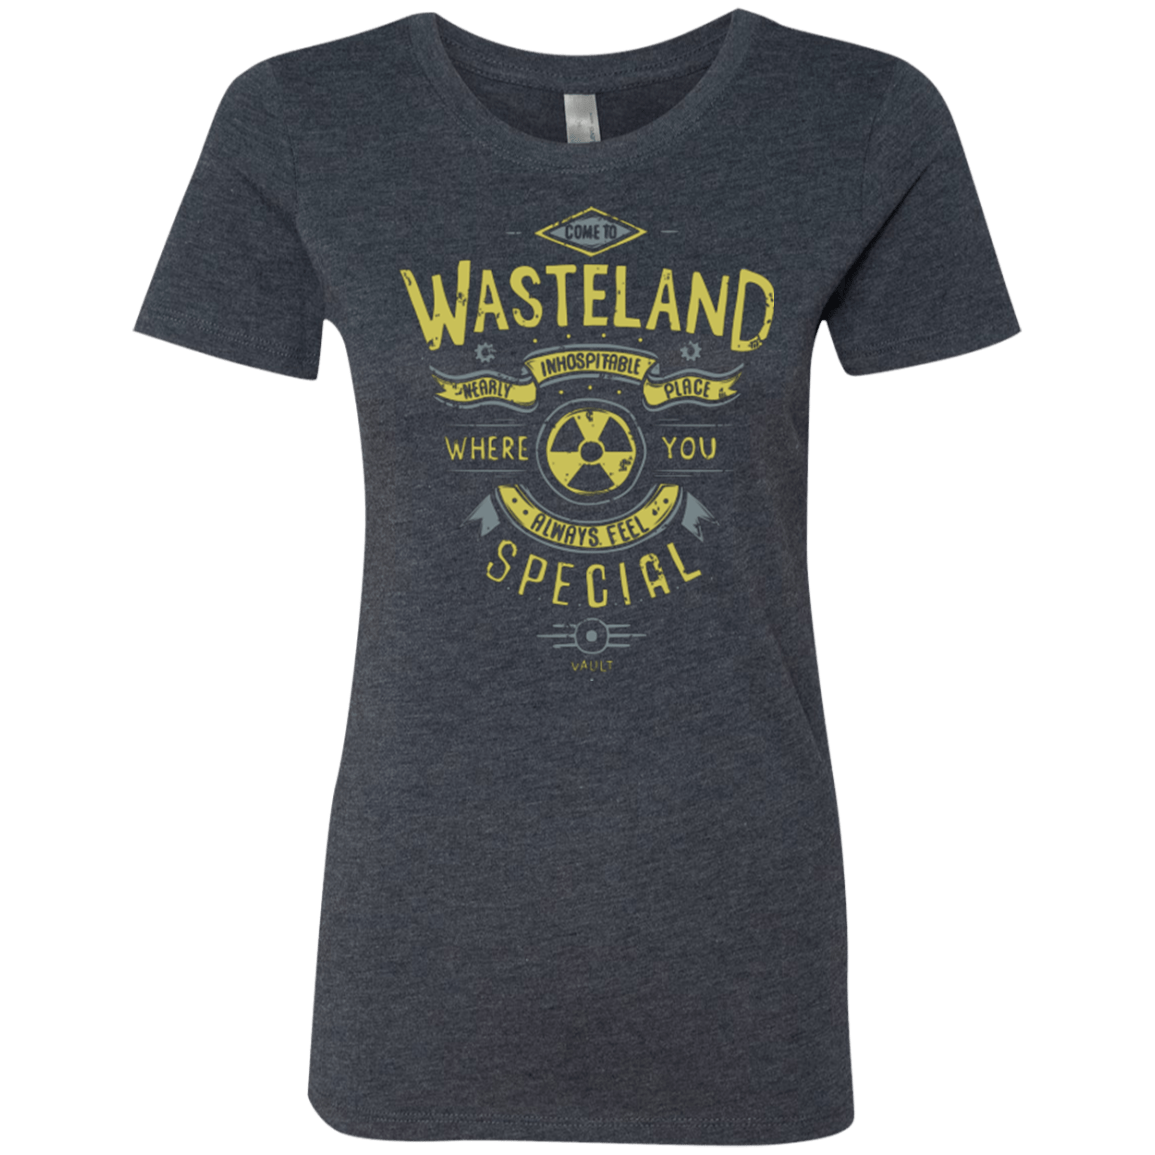 T-Shirts Vintage Navy / Small Come to wasteland Women's Triblend T-Shirt